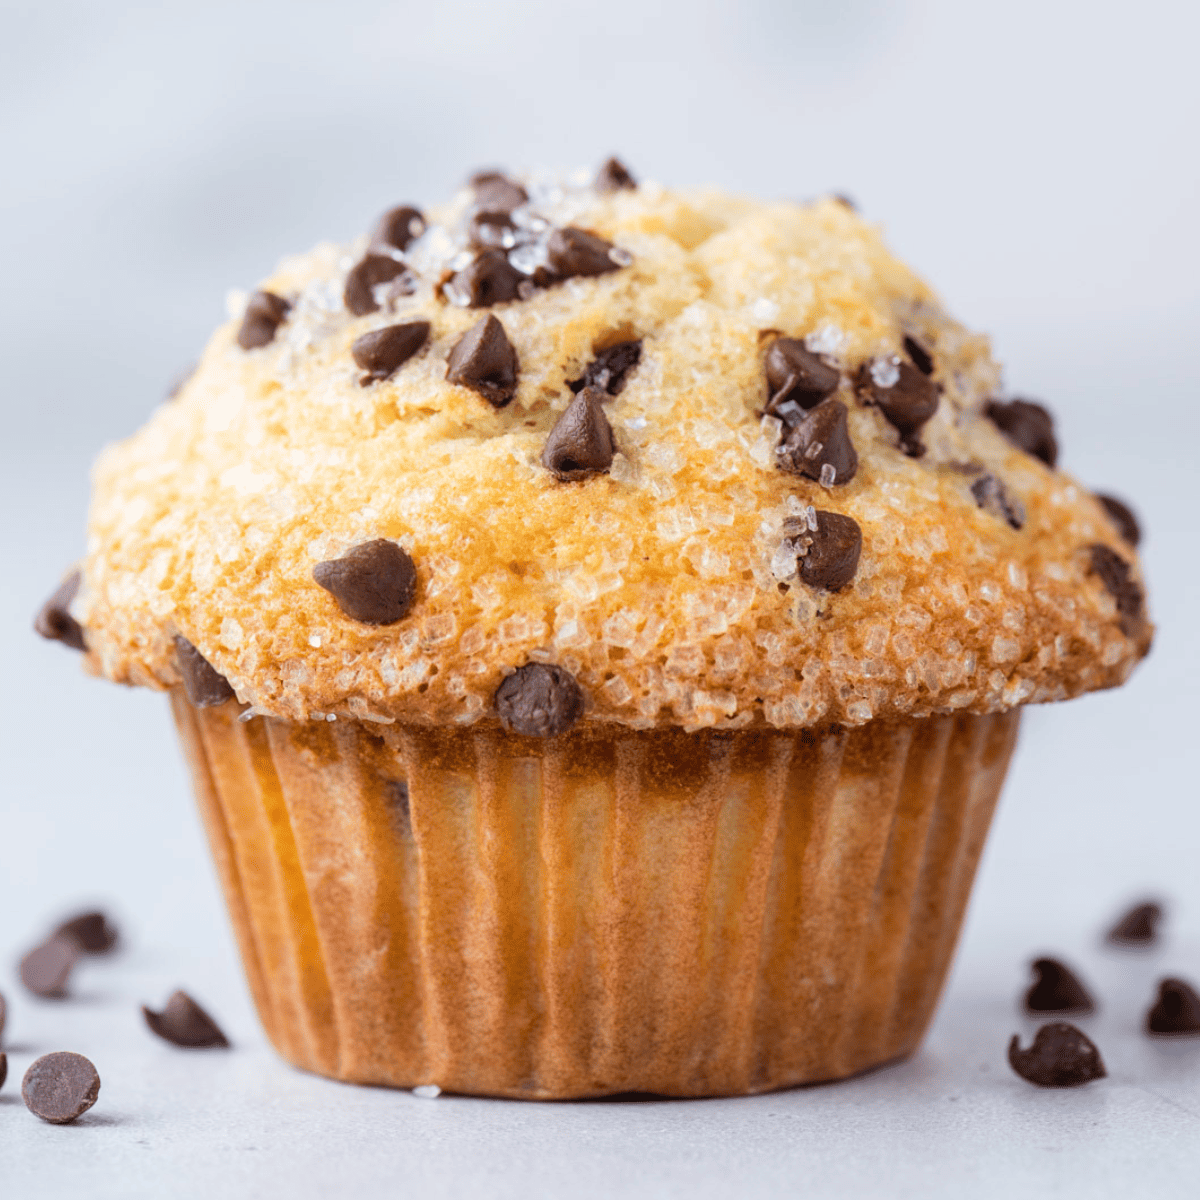 https://thefirstyearblog.com/wp-content/uploads/2020/05/Chocolate-Chip-Muffins-2023-Square.png